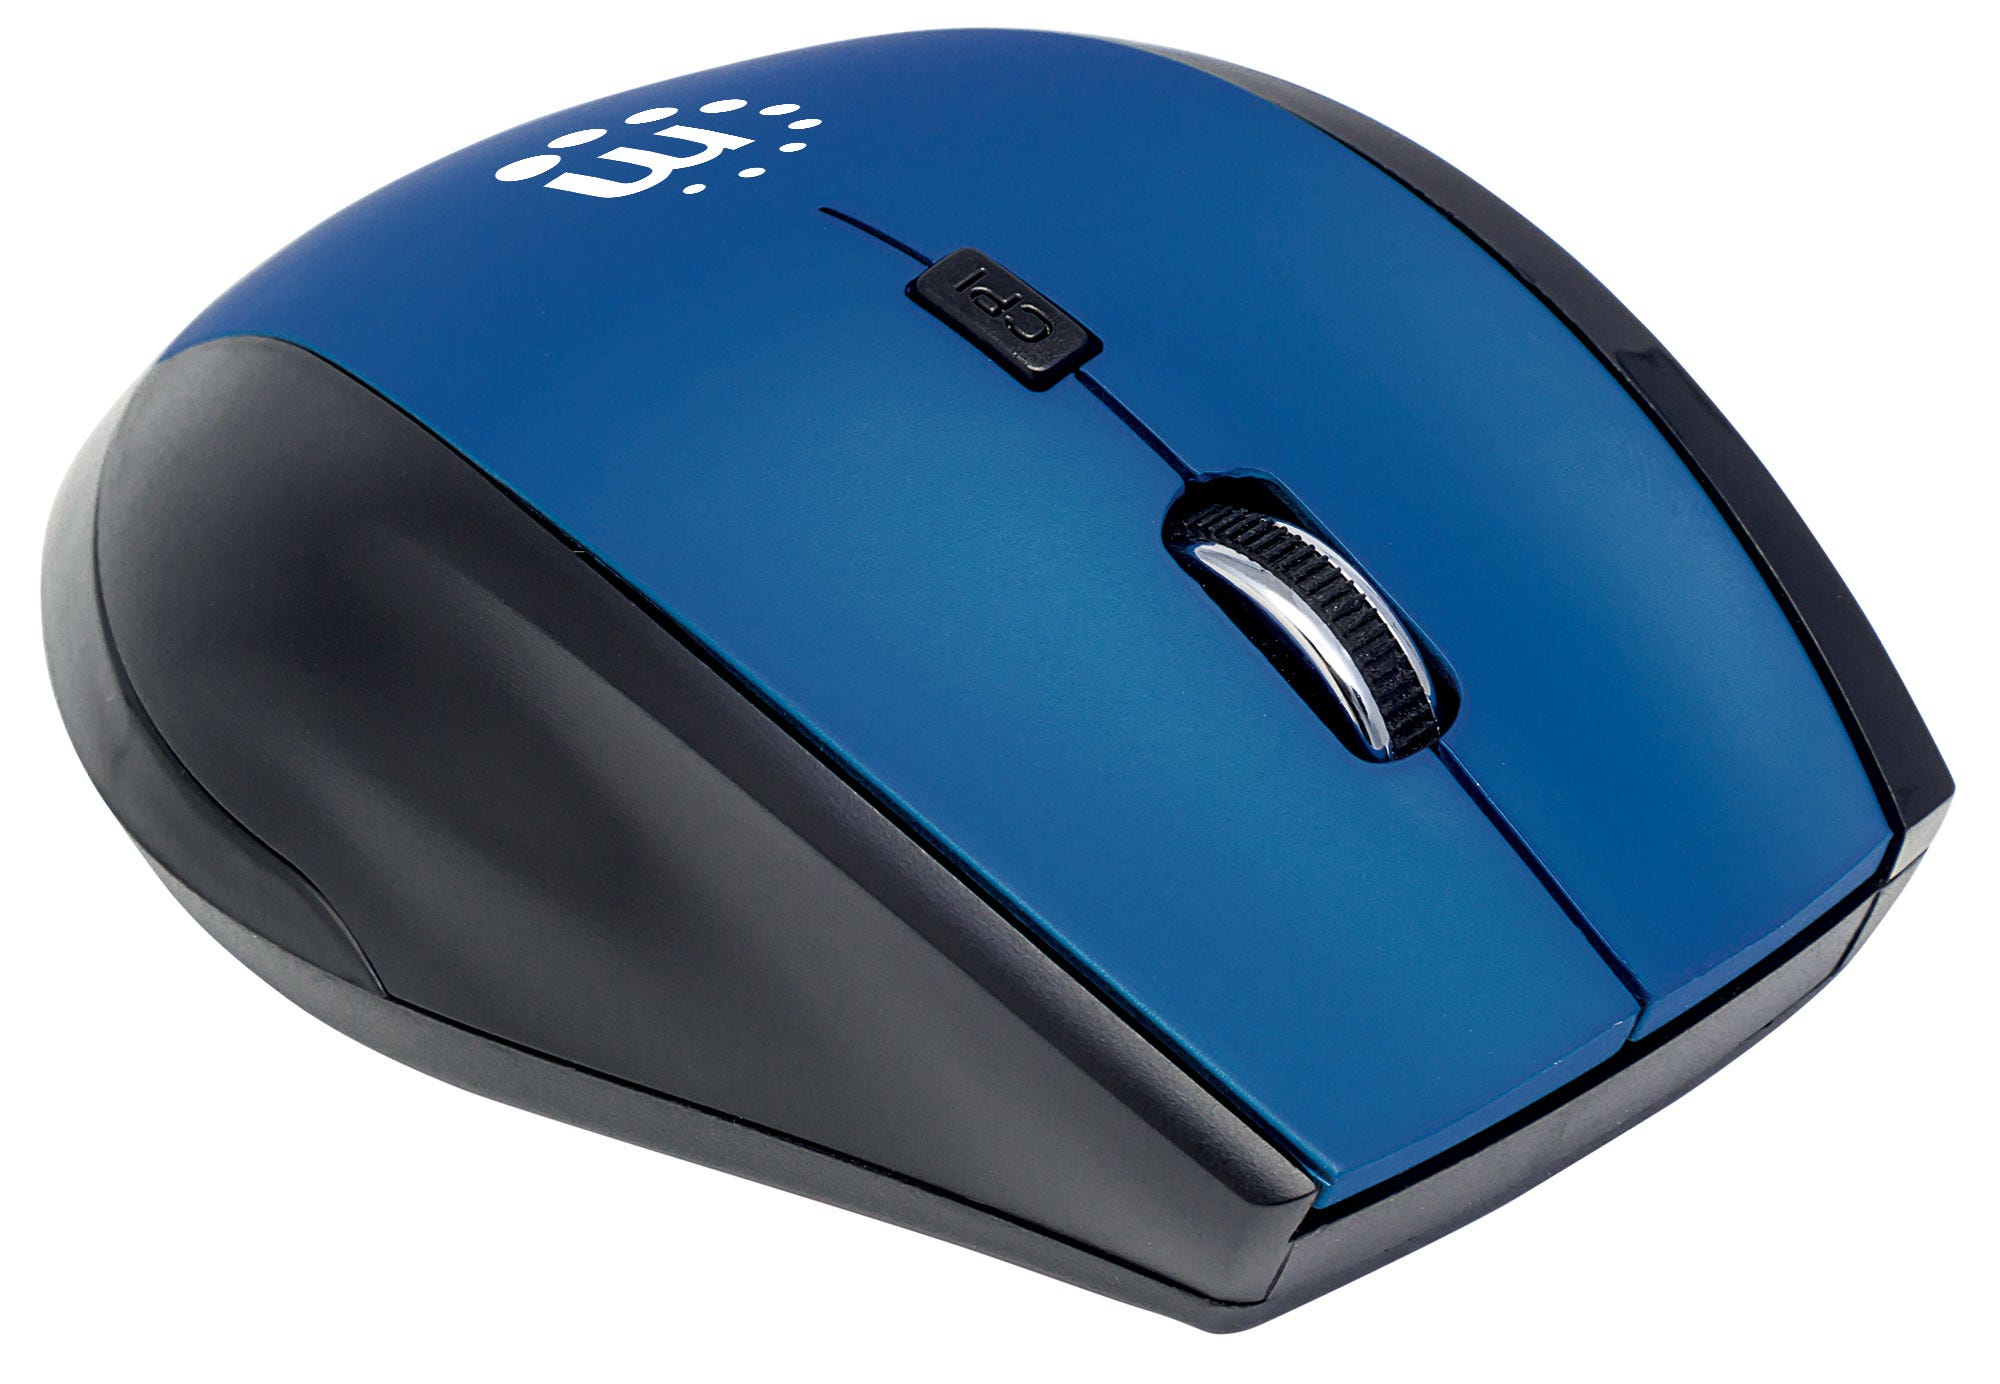 Manhattan Curve Wireless Mouse, Blue/Black, Adjustable DPI (800, 1200 or 1600dpi), 2.4Ghz (up to 10m), USB, Optical, Five Button with Scroll Wheel, USB micro receiver, 2x AAA batteries (included), Low friction base, Blister